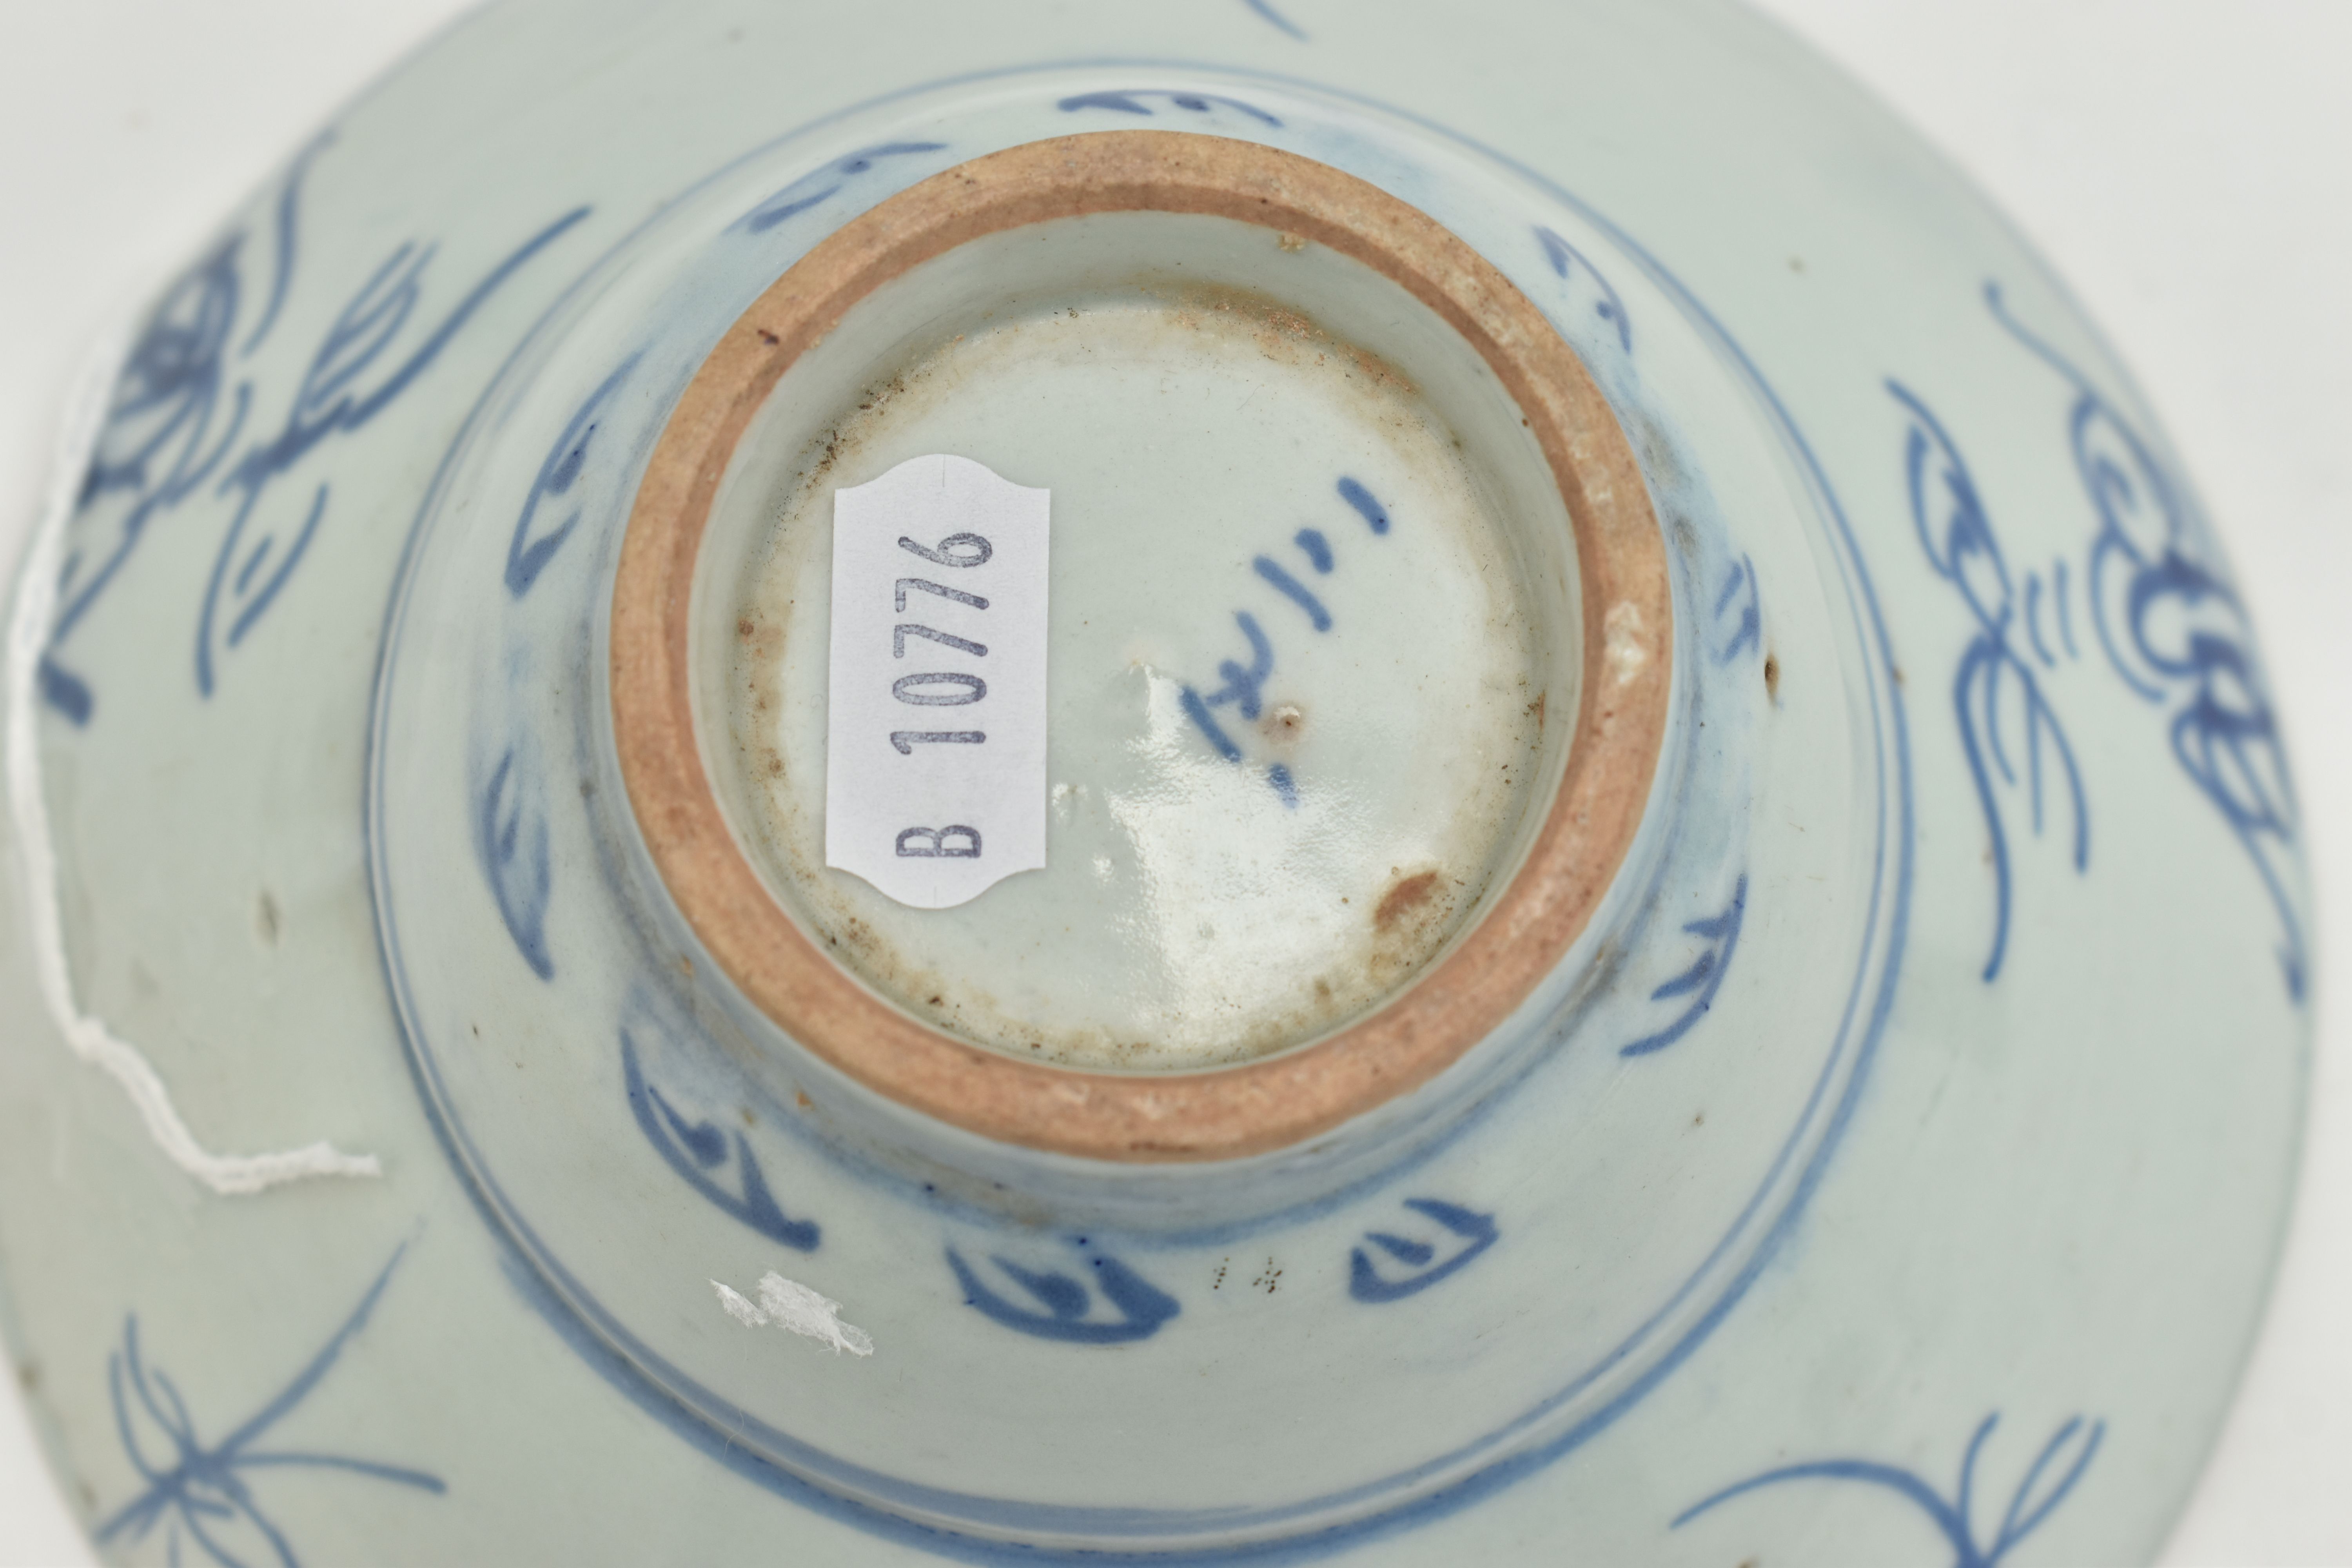 A LATE 18TH / EARLY 19TH CENTURY CHINESE PORCELAIN BLUE AND WHITE PORCELAIN TEK SING CARGO TYPE - Image 8 of 8